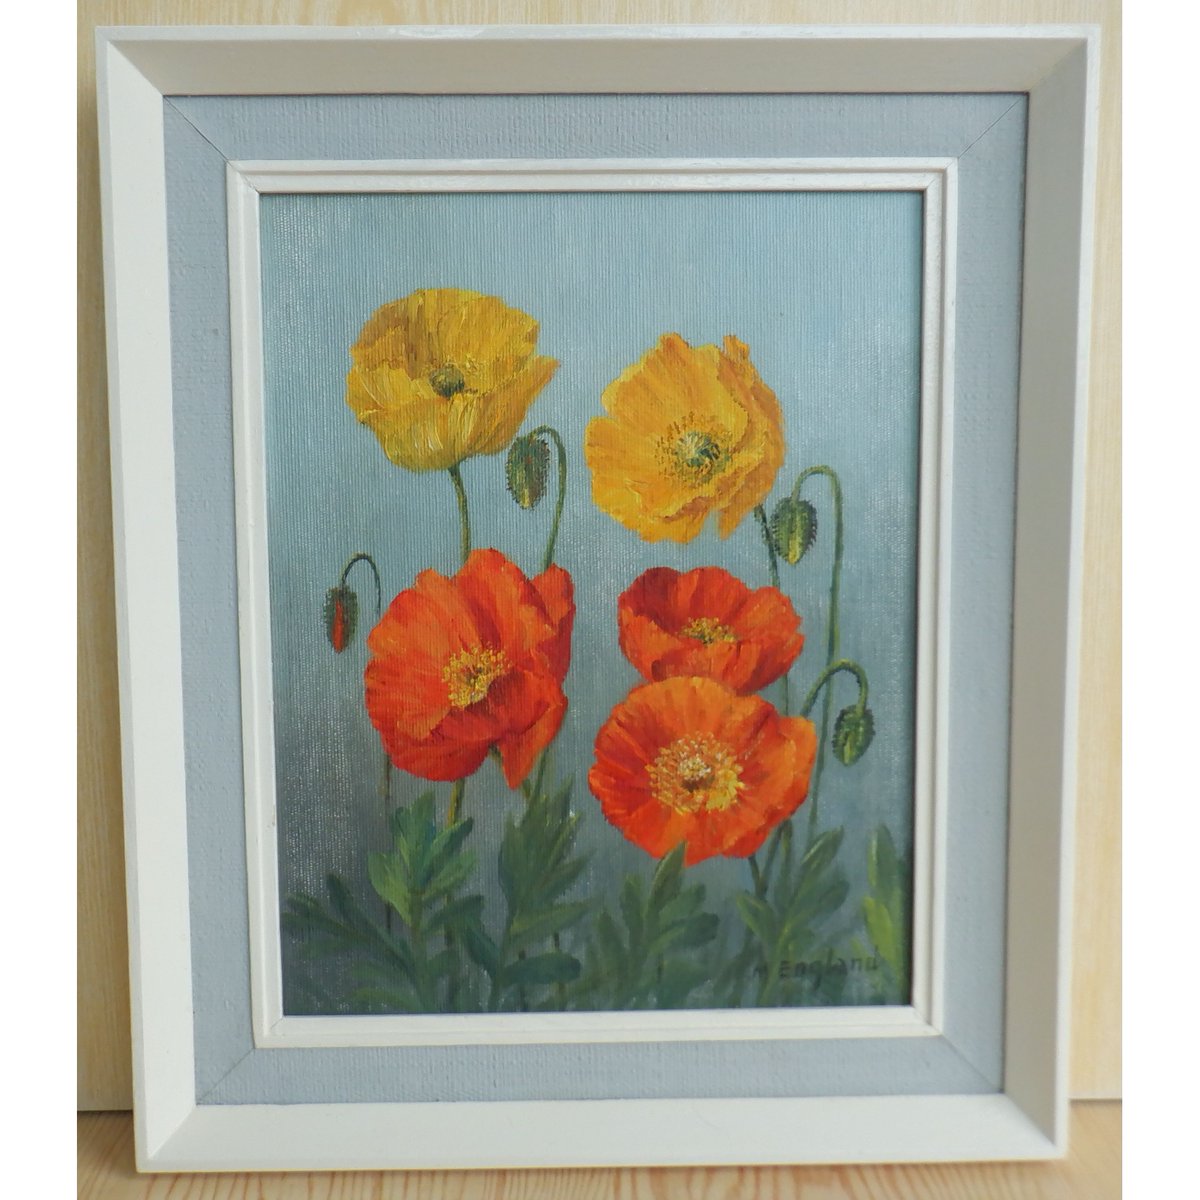 A still life painting of Iceland Poppies by Muriel England FRSA. The frame measures 28 cm x 33 cm. 👩‍🎨🎨 🛒 ebay.co.uk/itm/2355230695… #Art #IcelandPoppies #Popppies #FloralArt #FollowVintage #FRSA #MurielEngland #eBay